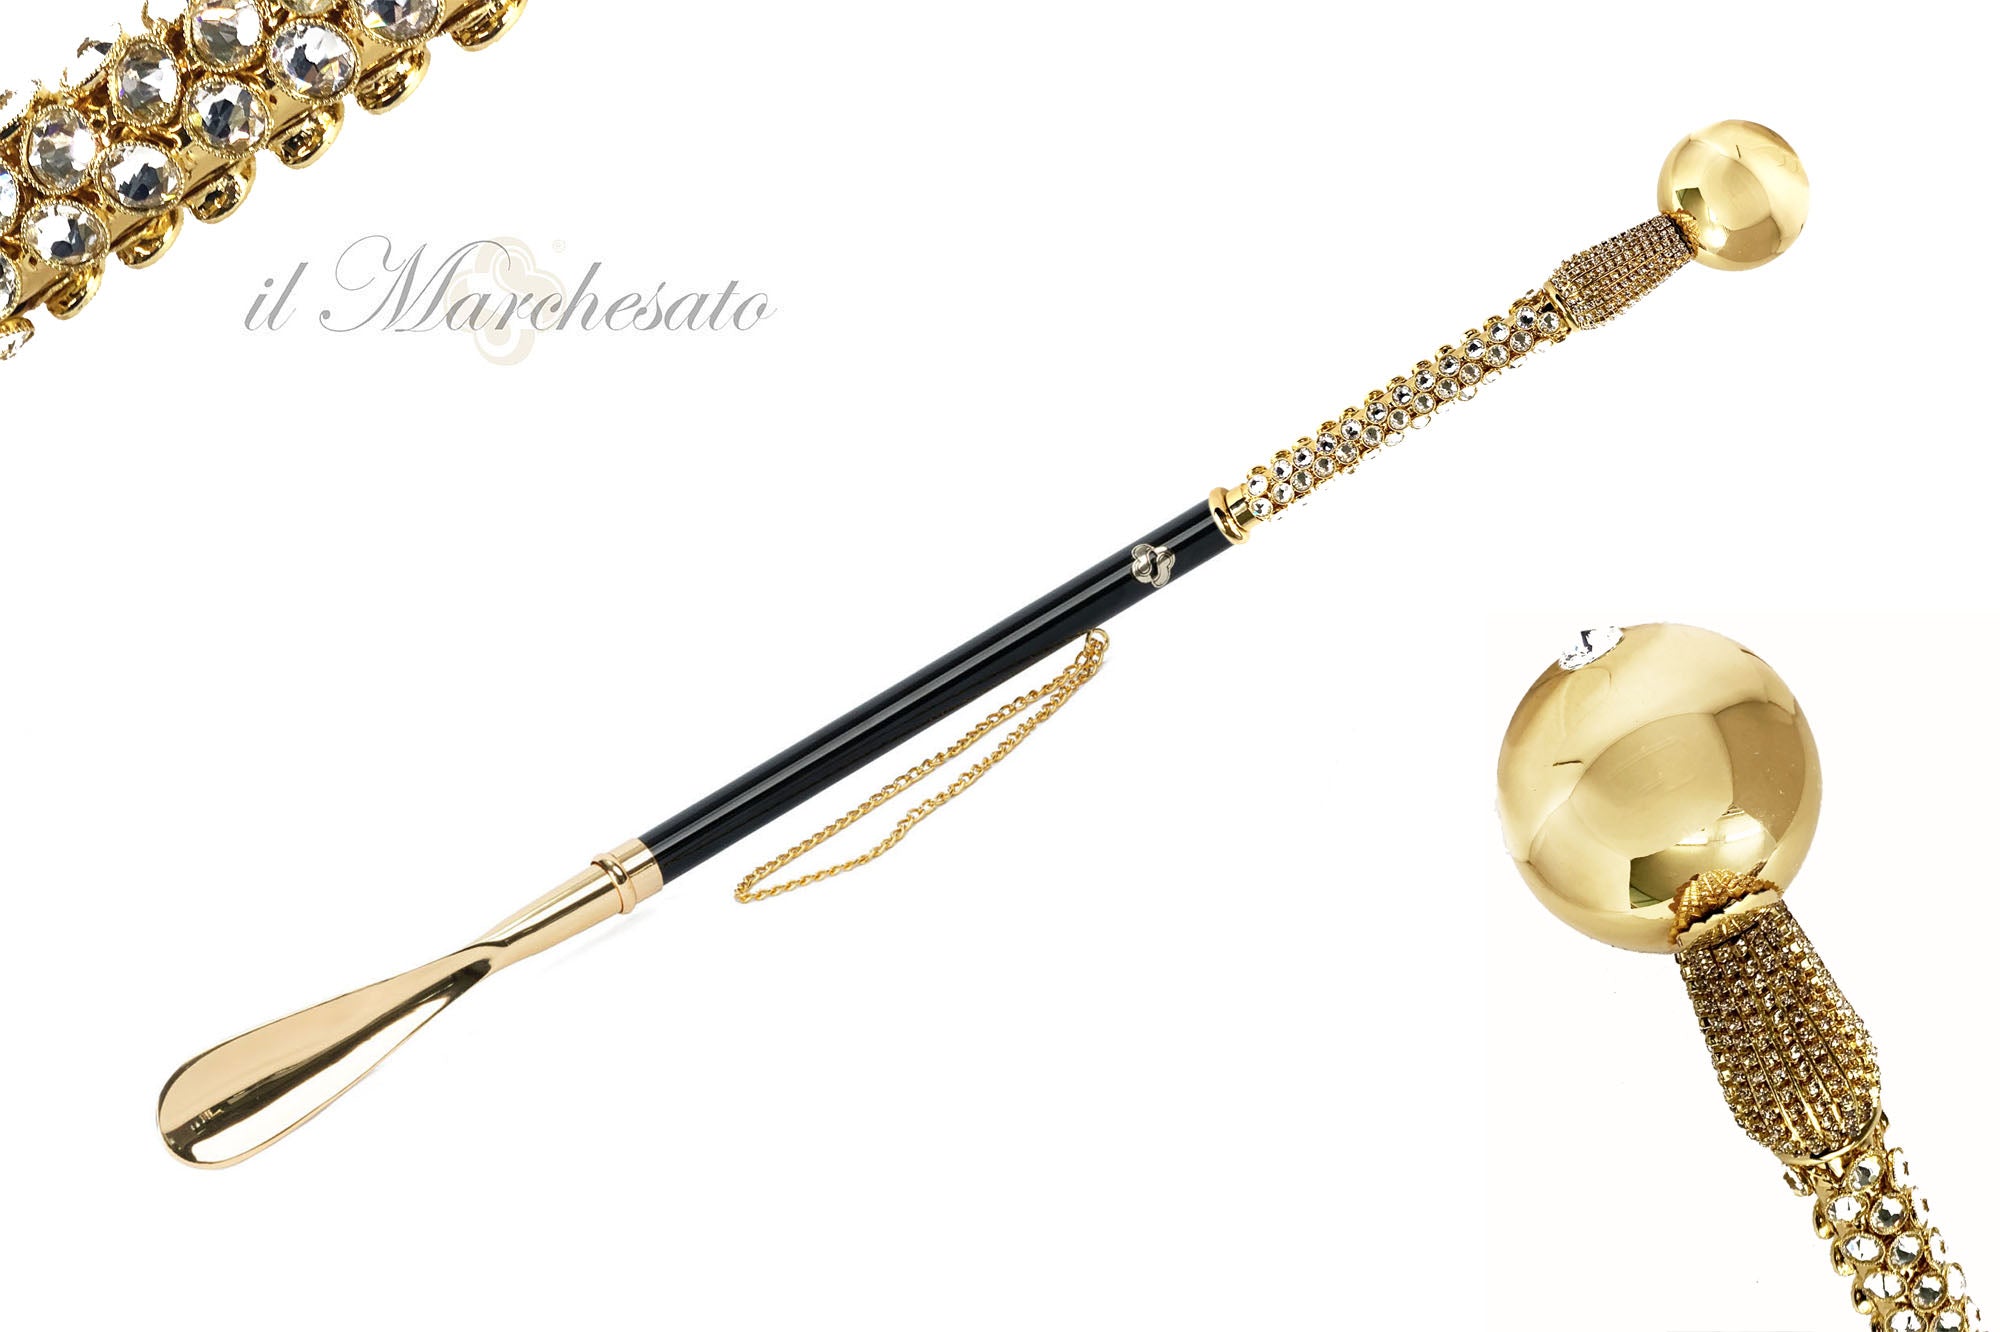 Chic Elegance: Ultra-Luxury Shoehorn Adorned with Hundreds of Crystals